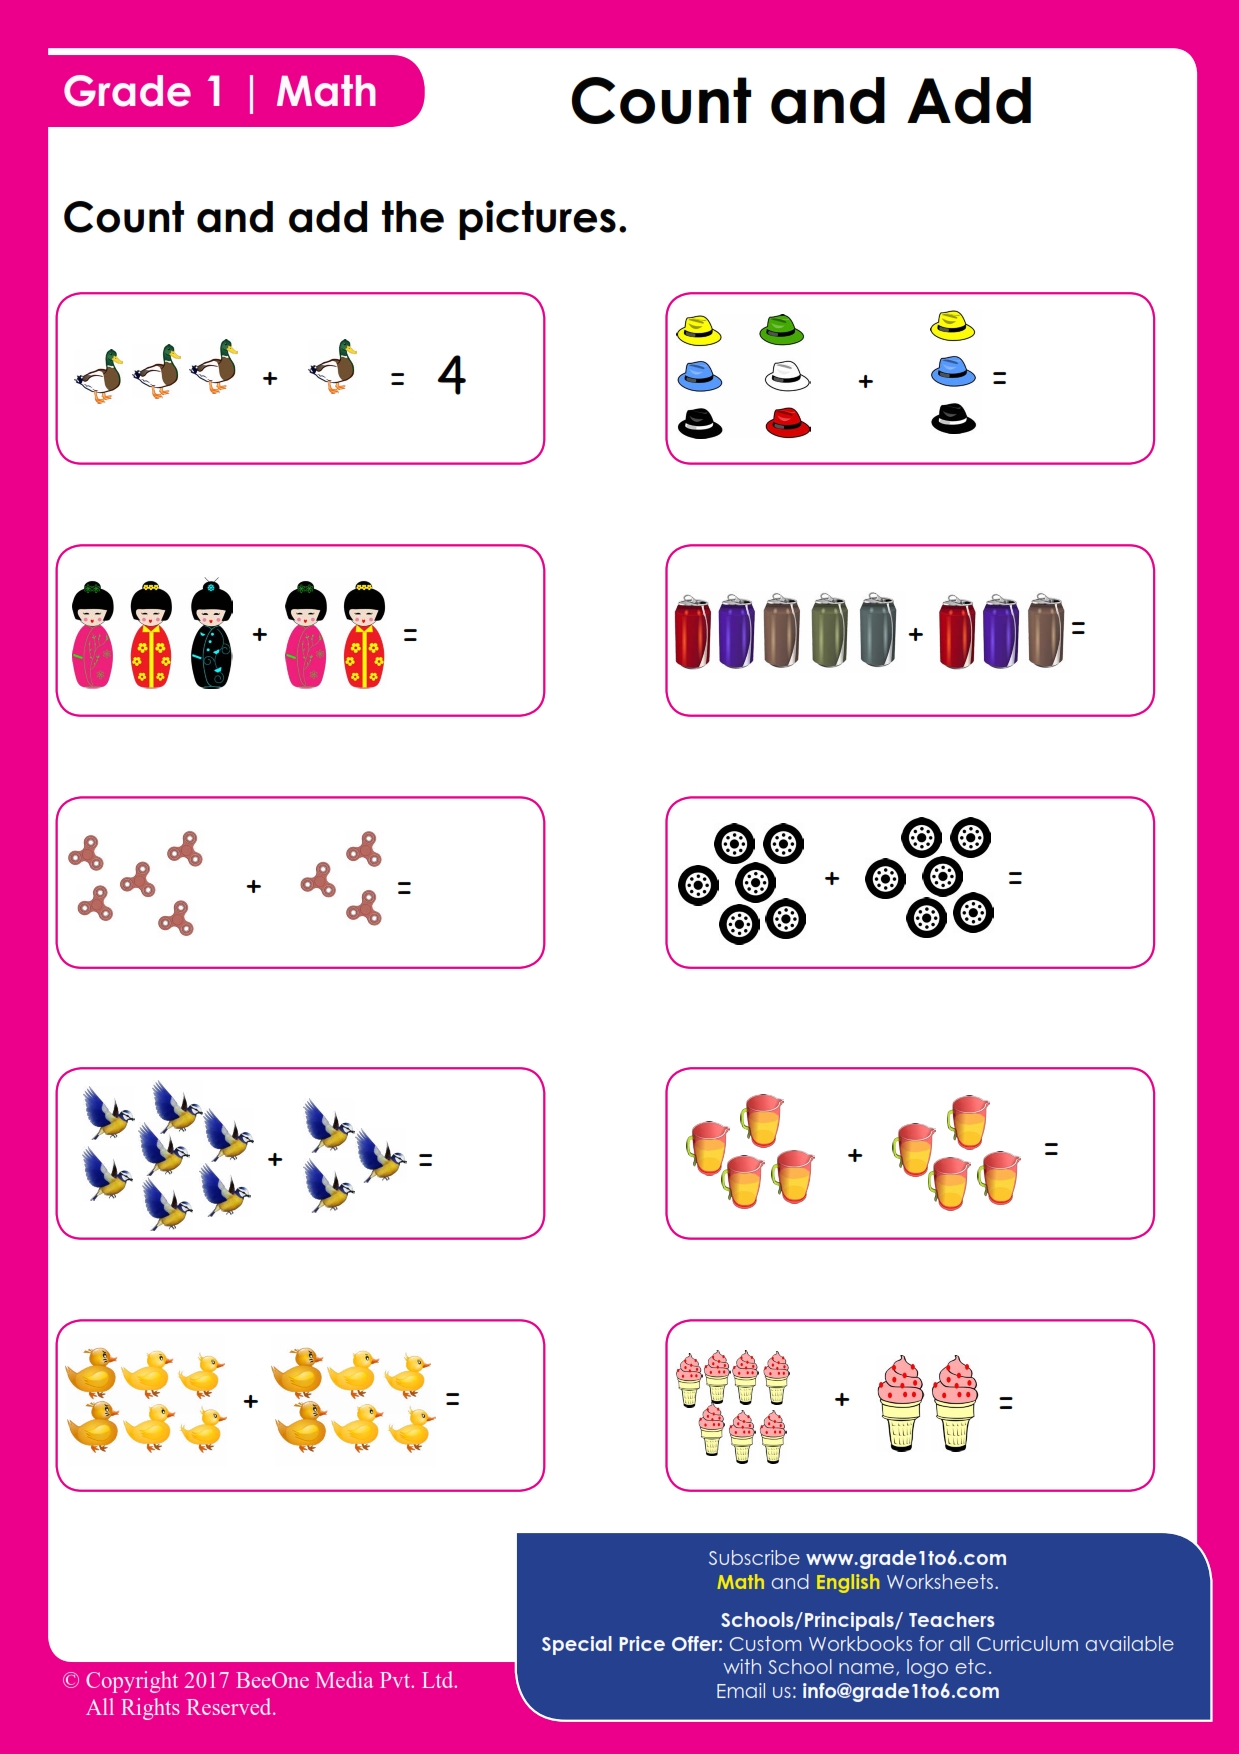 Counting objects worksheet | Grade1to6.com